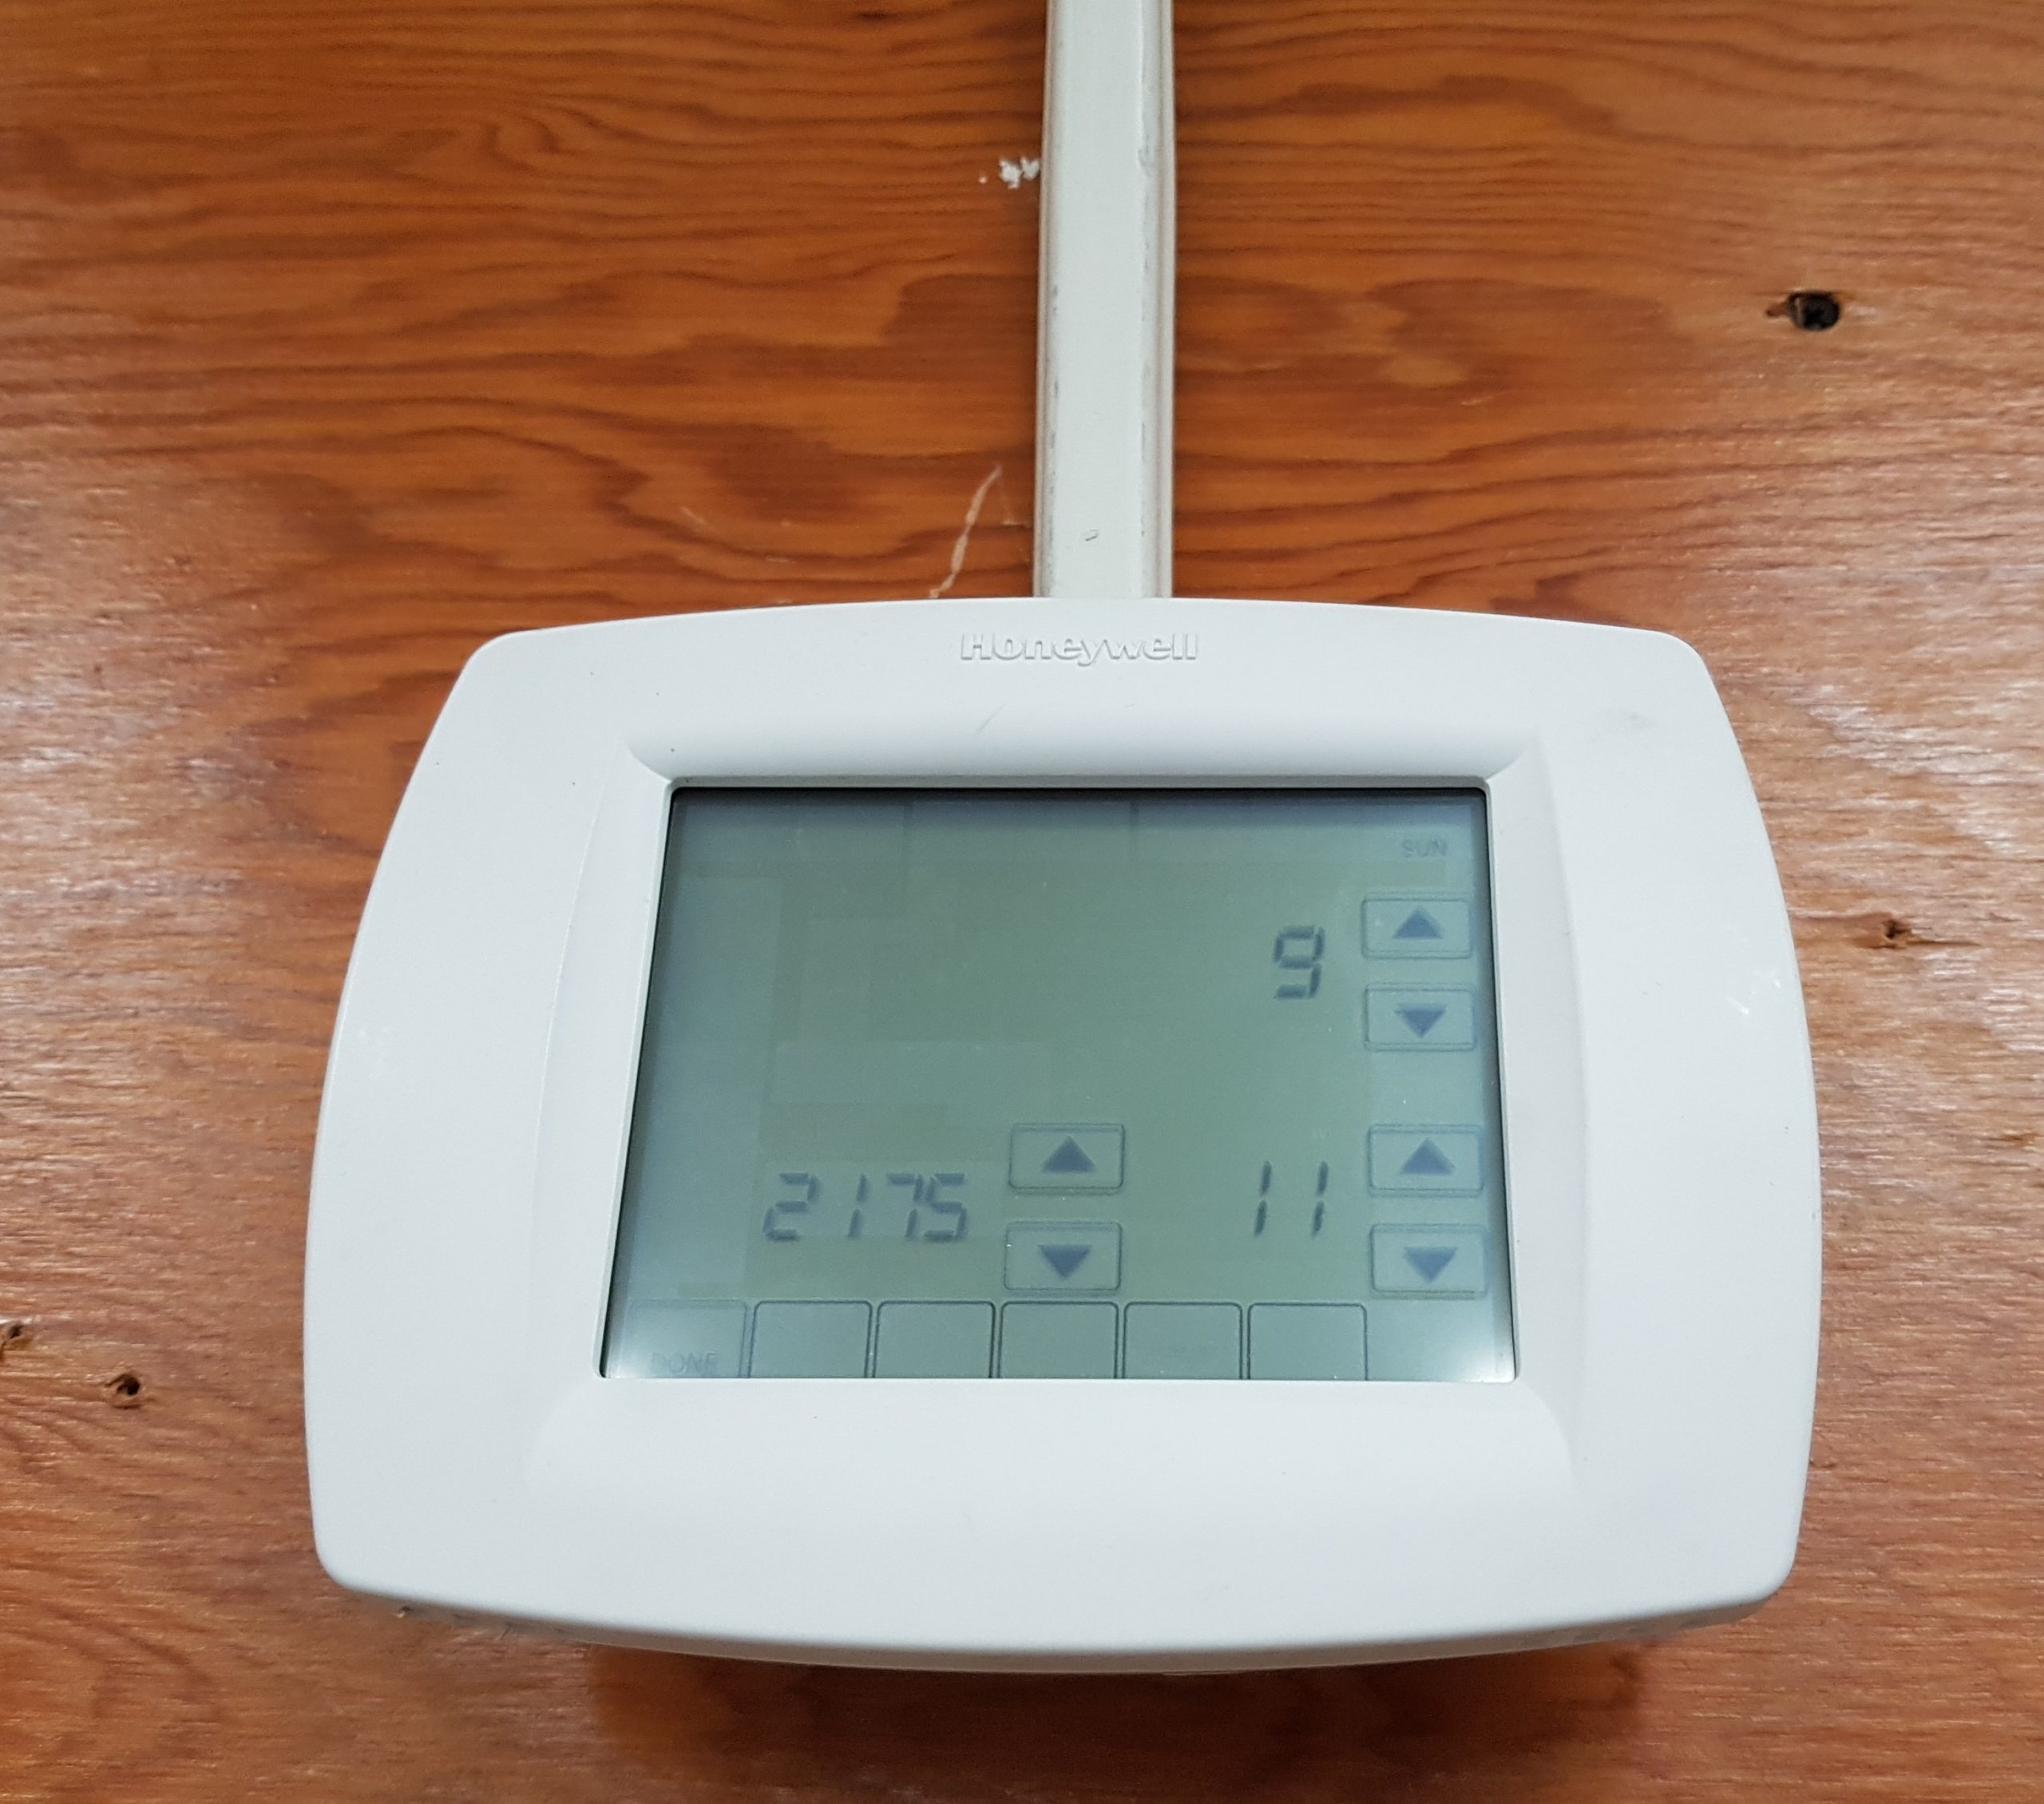 An electronic thermostat with a touch screen attached to the wall.